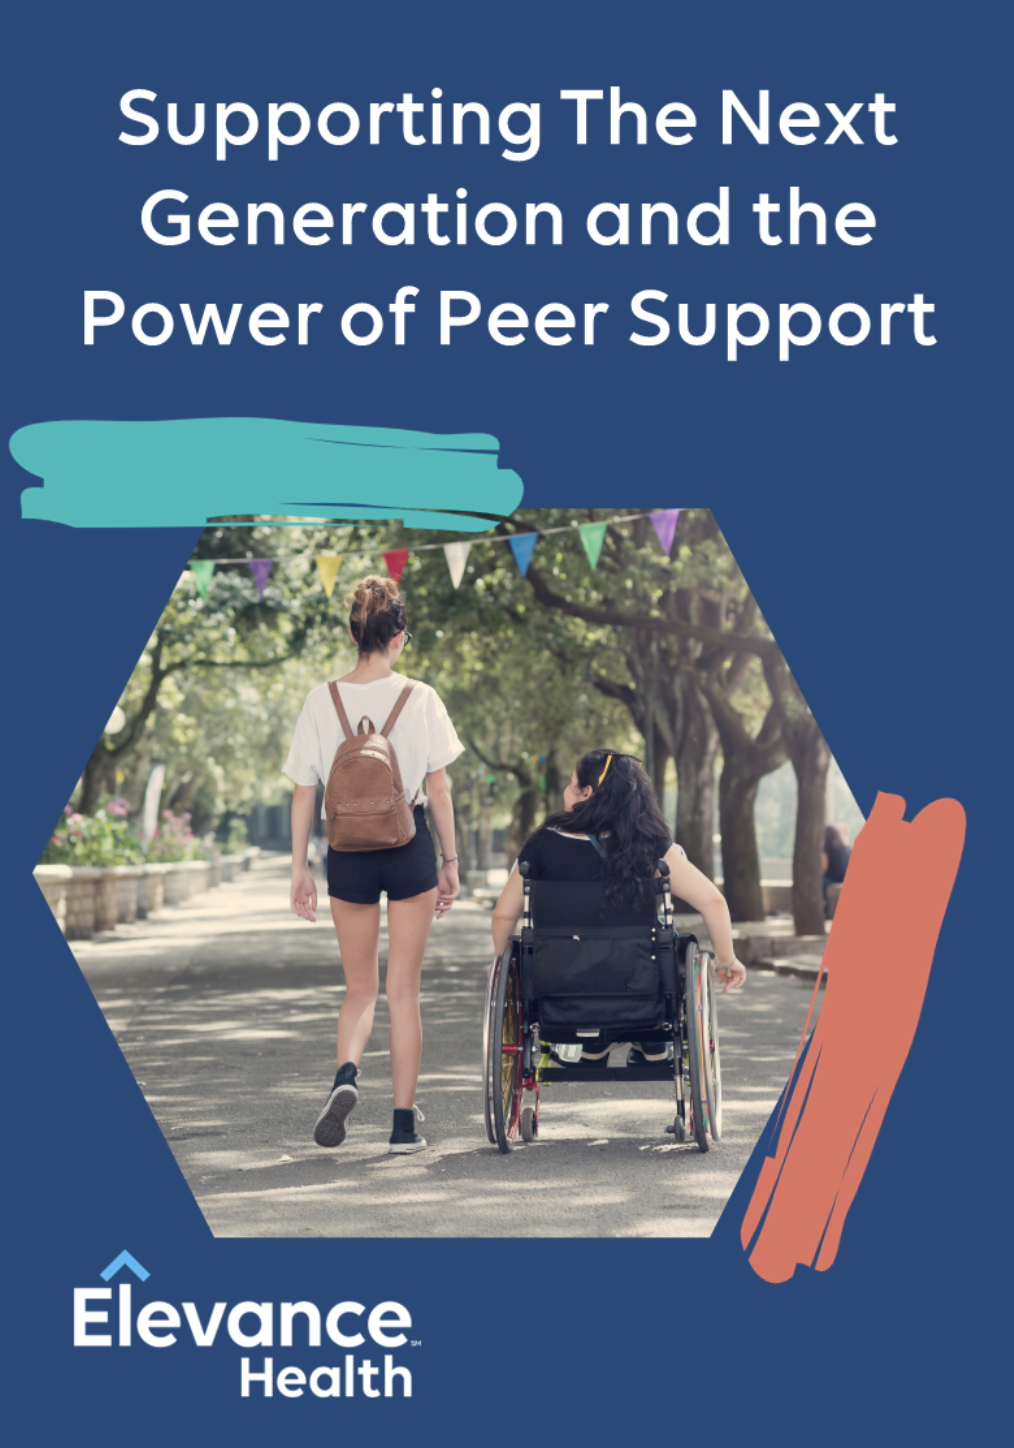 APRIL Sponsor Elevance Health. Dark blue background with the image of two people from the back. One is walking and has a backpack on their back. The other is in a wheelchair. Above them are the words "supporting the next generation and the power of peer support".